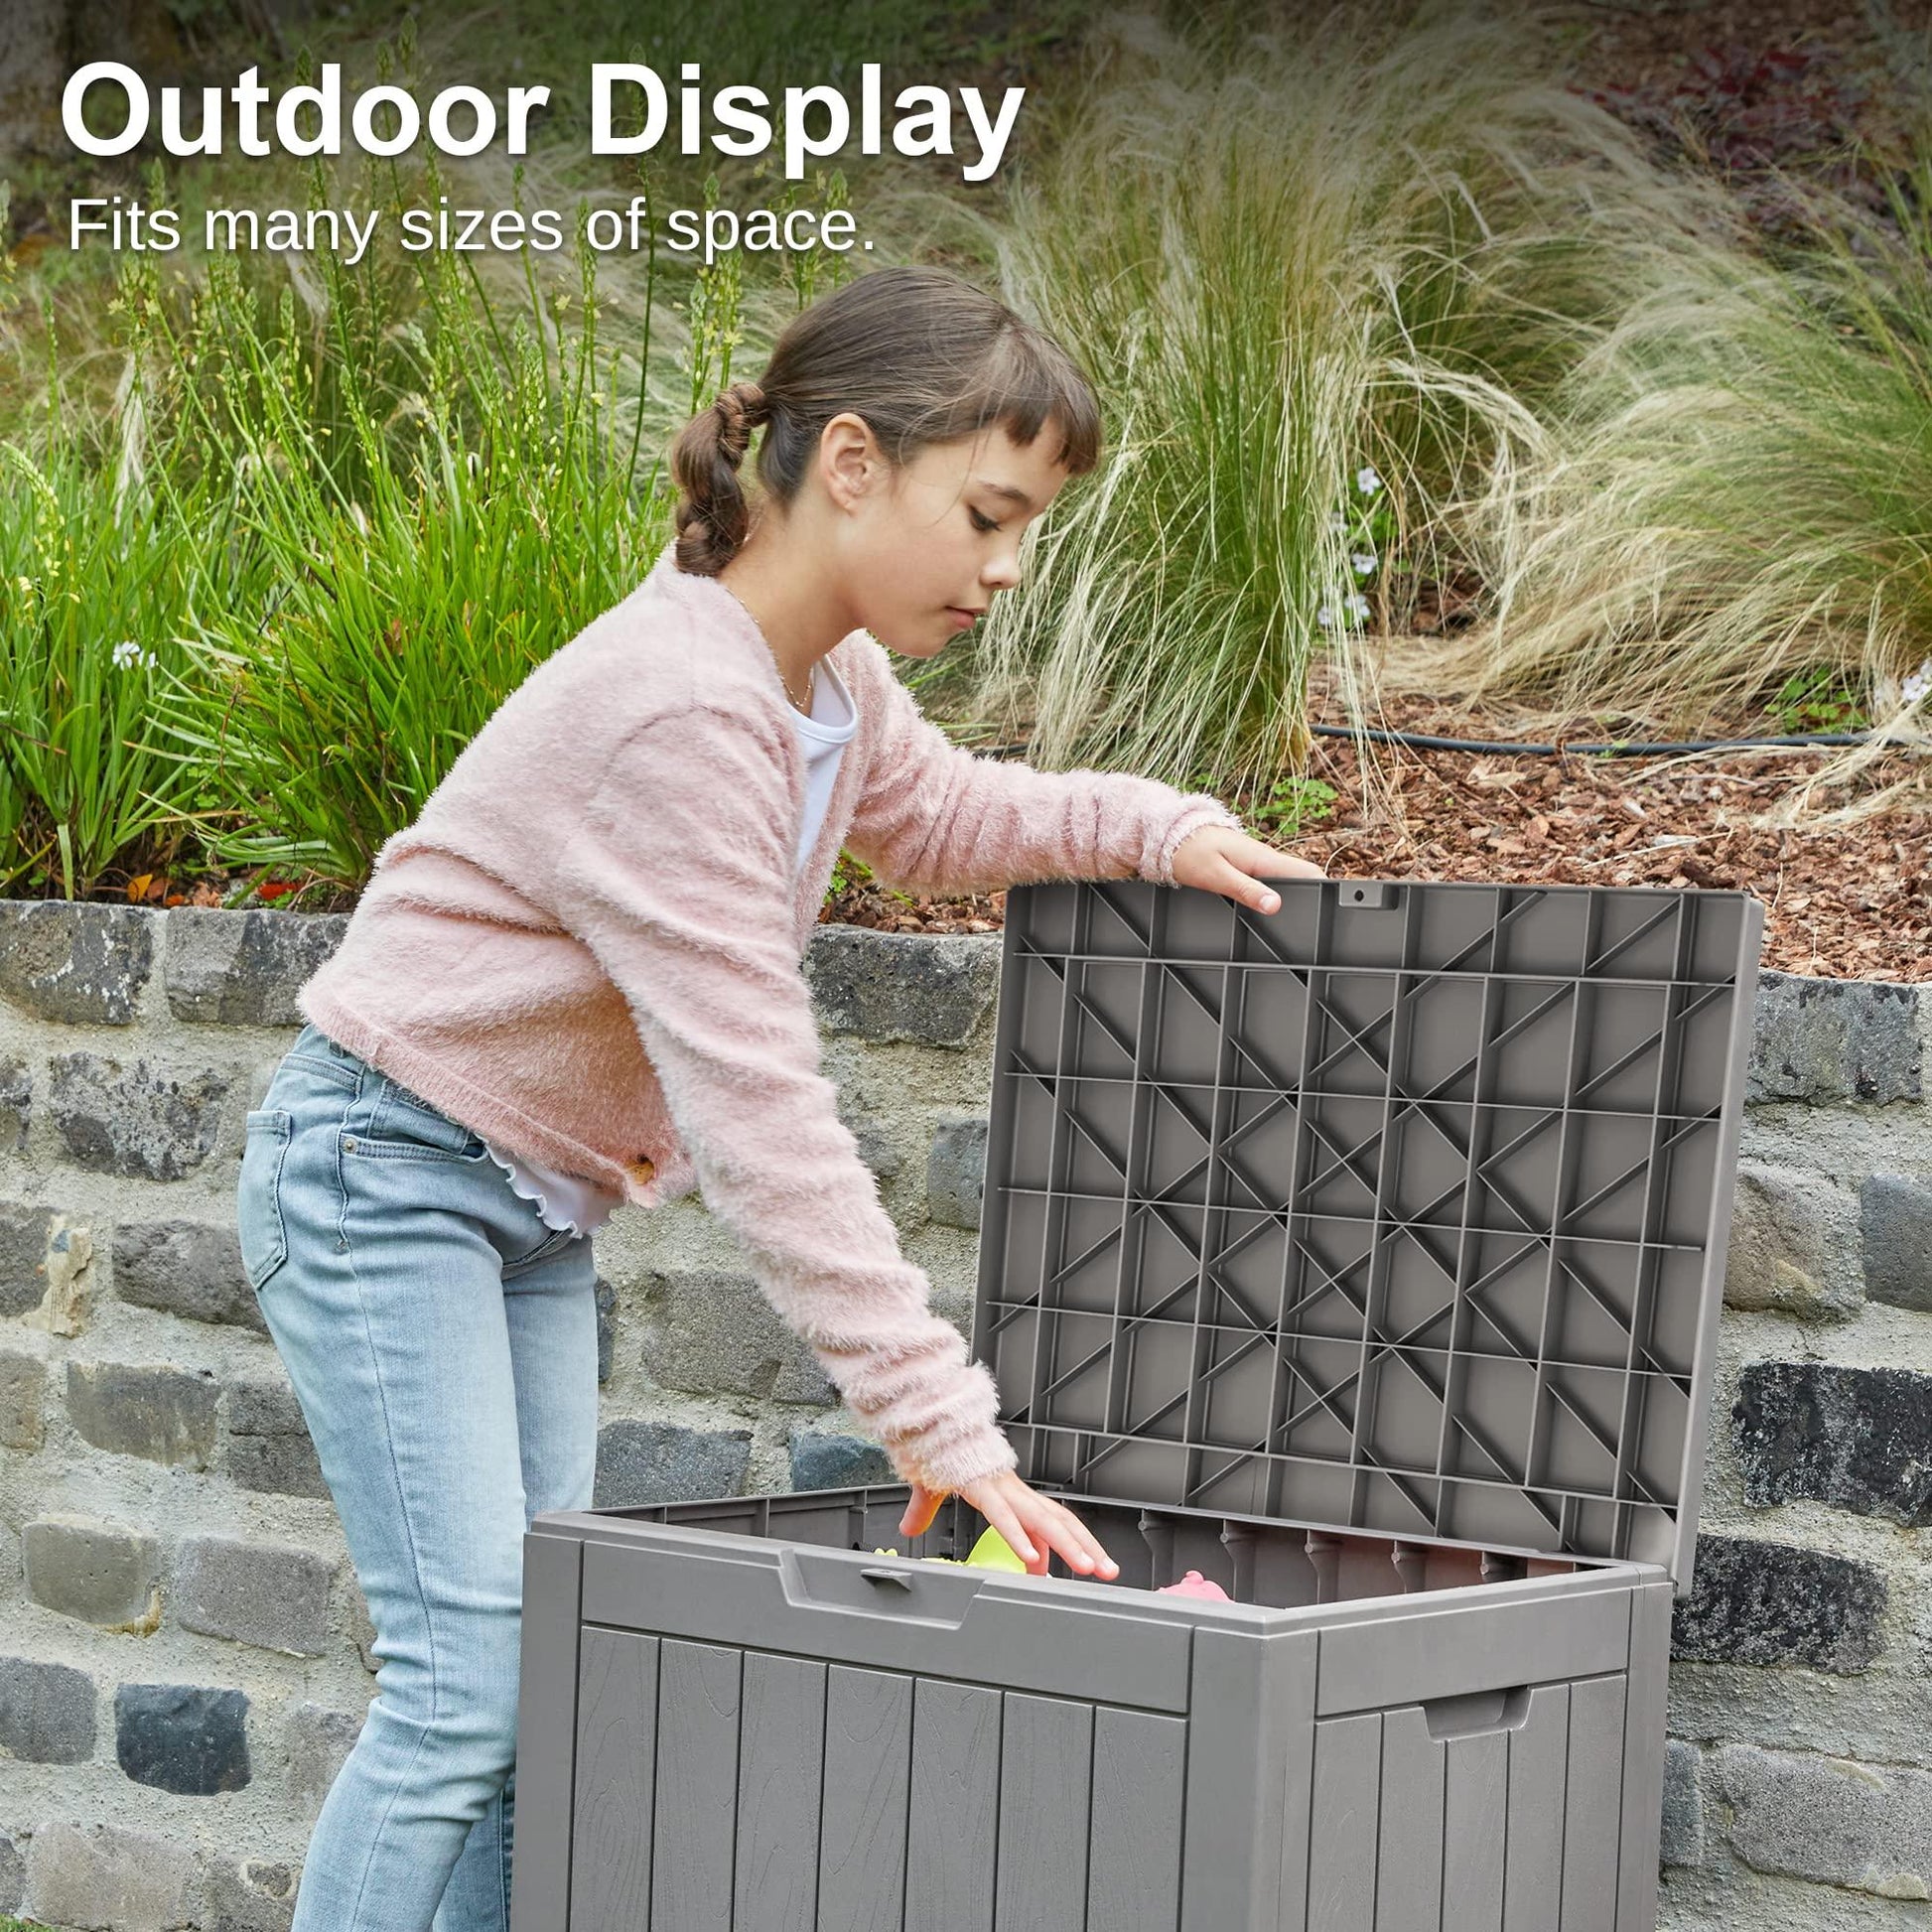 EAST OAK Deck Box, 31 Gallon Indoor and Outdoor Storage Box with Padlock for Patio Cushions, Outdoor Toys, Gardening Tools, Sports Equipment, Waterproof and UV Resistant Resin, Grey - CookCave